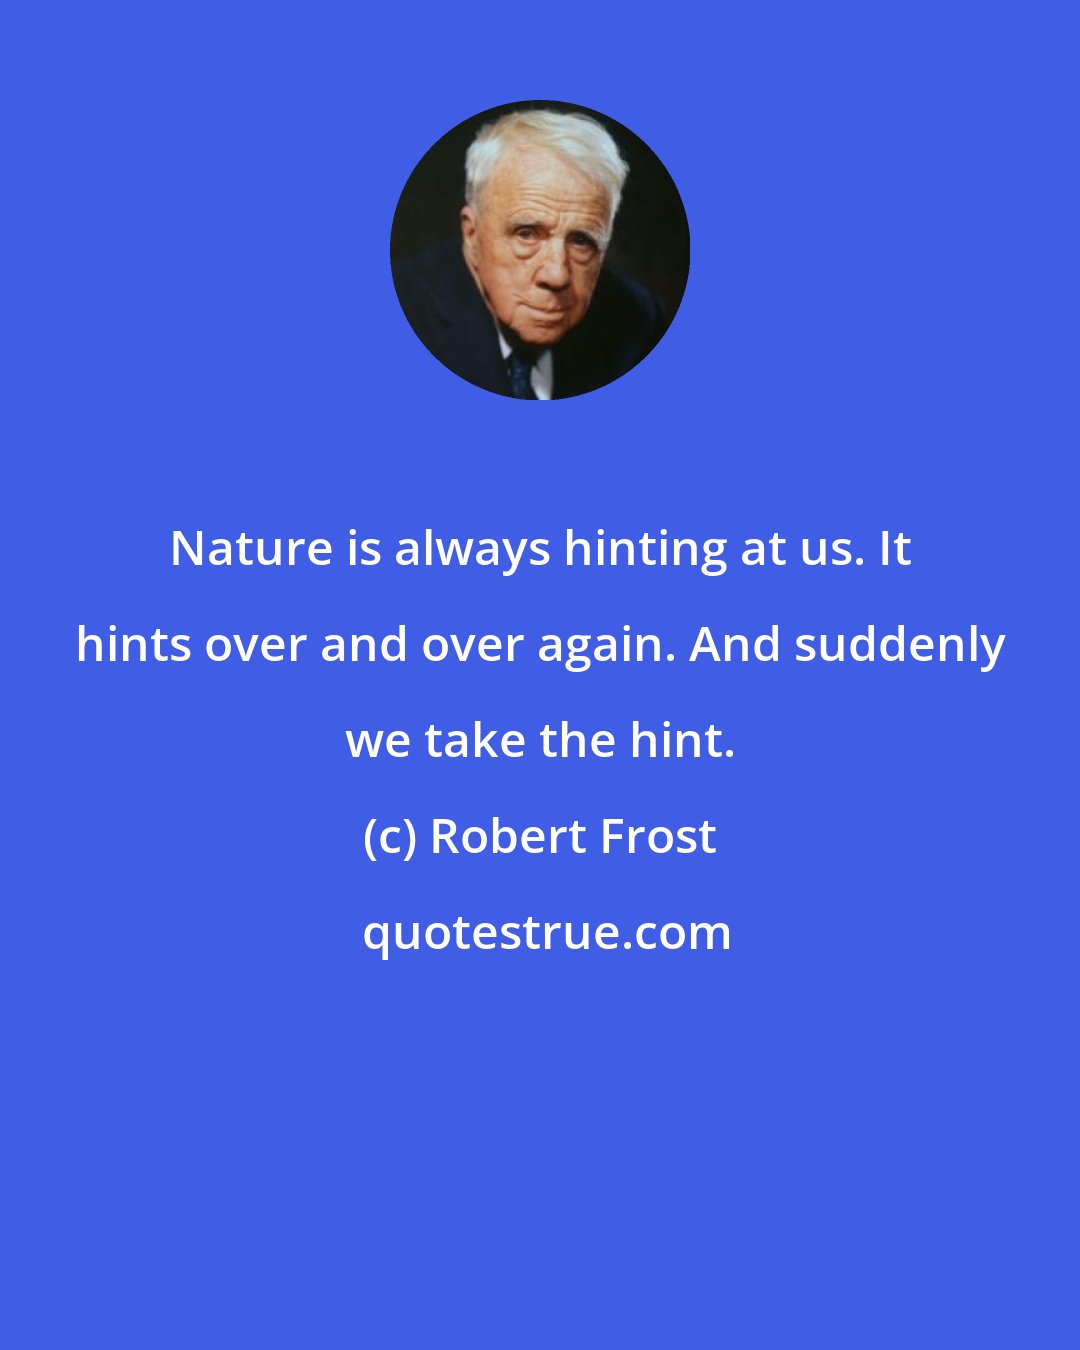 Robert Frost: Nature is always hinting at us. It hints over and over again. And suddenly we take the hint.